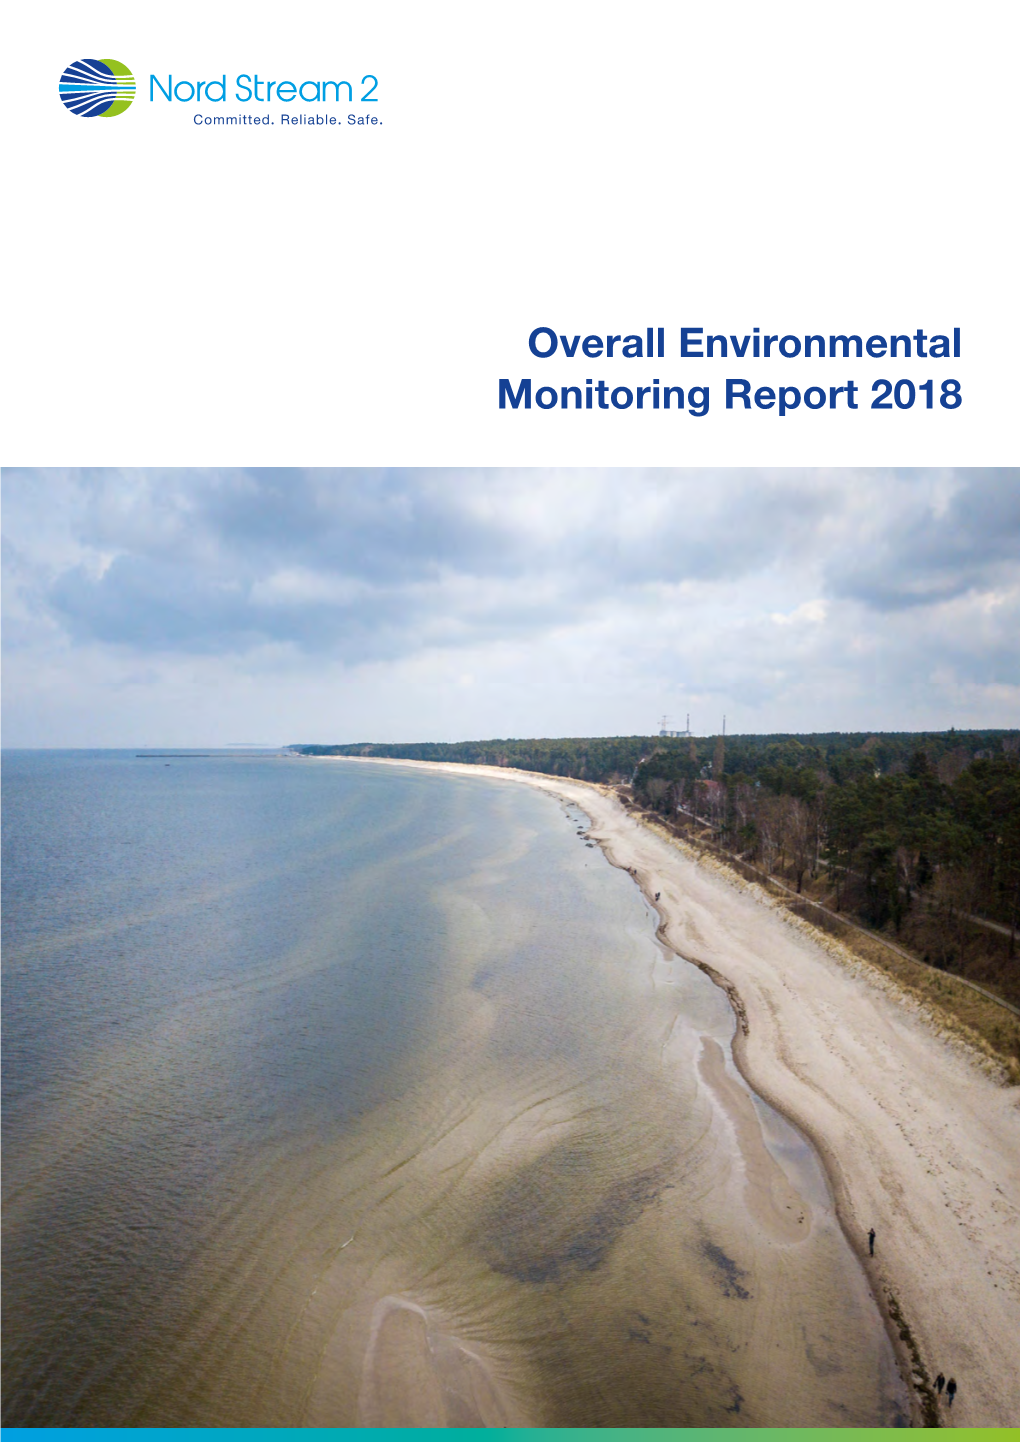 Overall Environmental Monitoring Report 2018 Overall Environmental Monitoring Report 2018